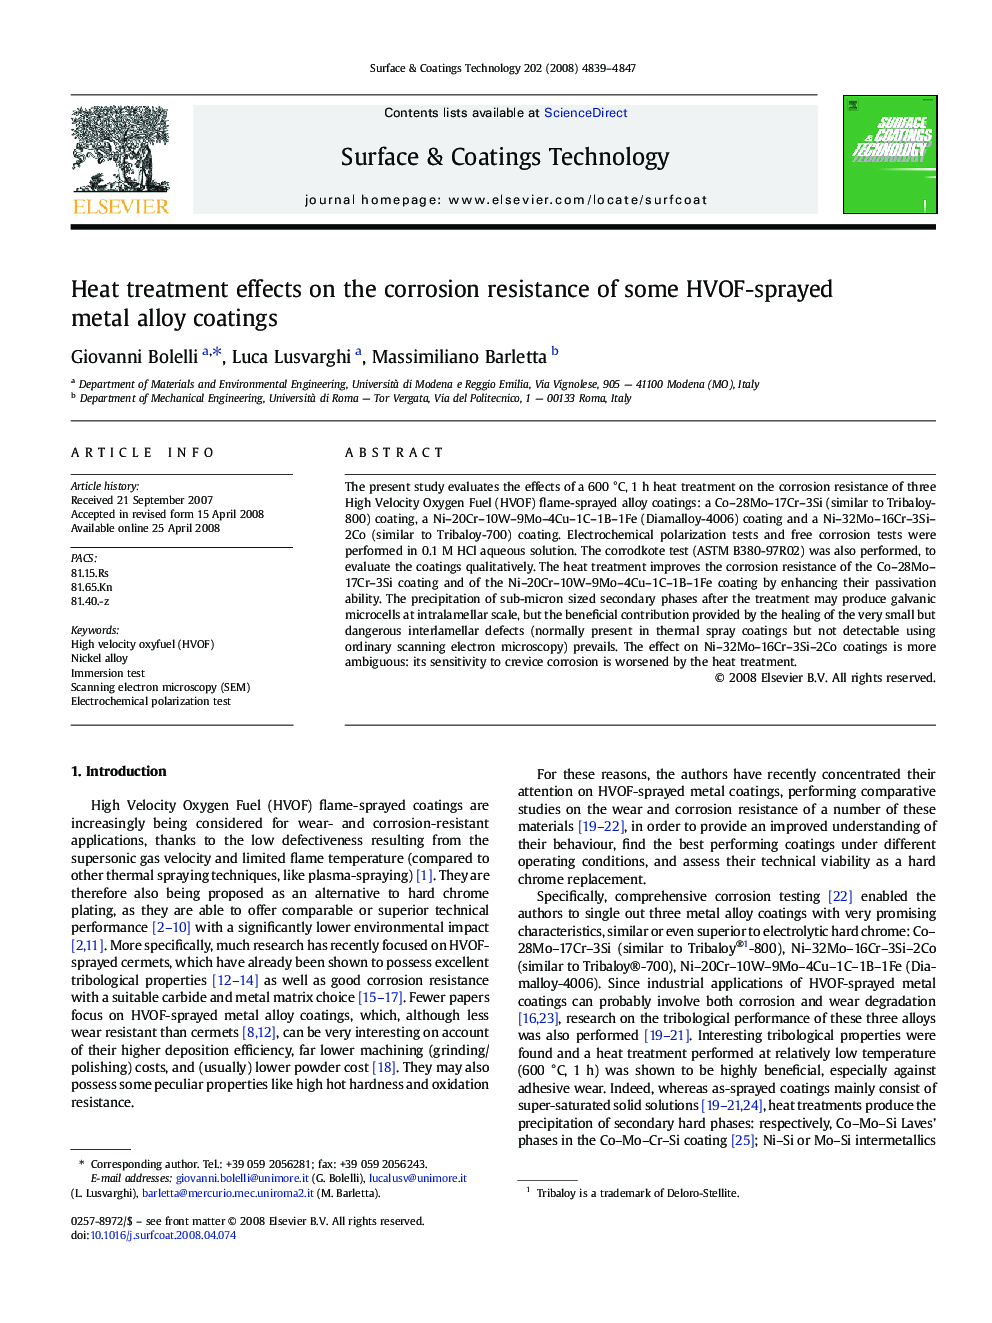 Heat treatment effects on the corrosion resistance of some HVOF-sprayed metal alloy coatings